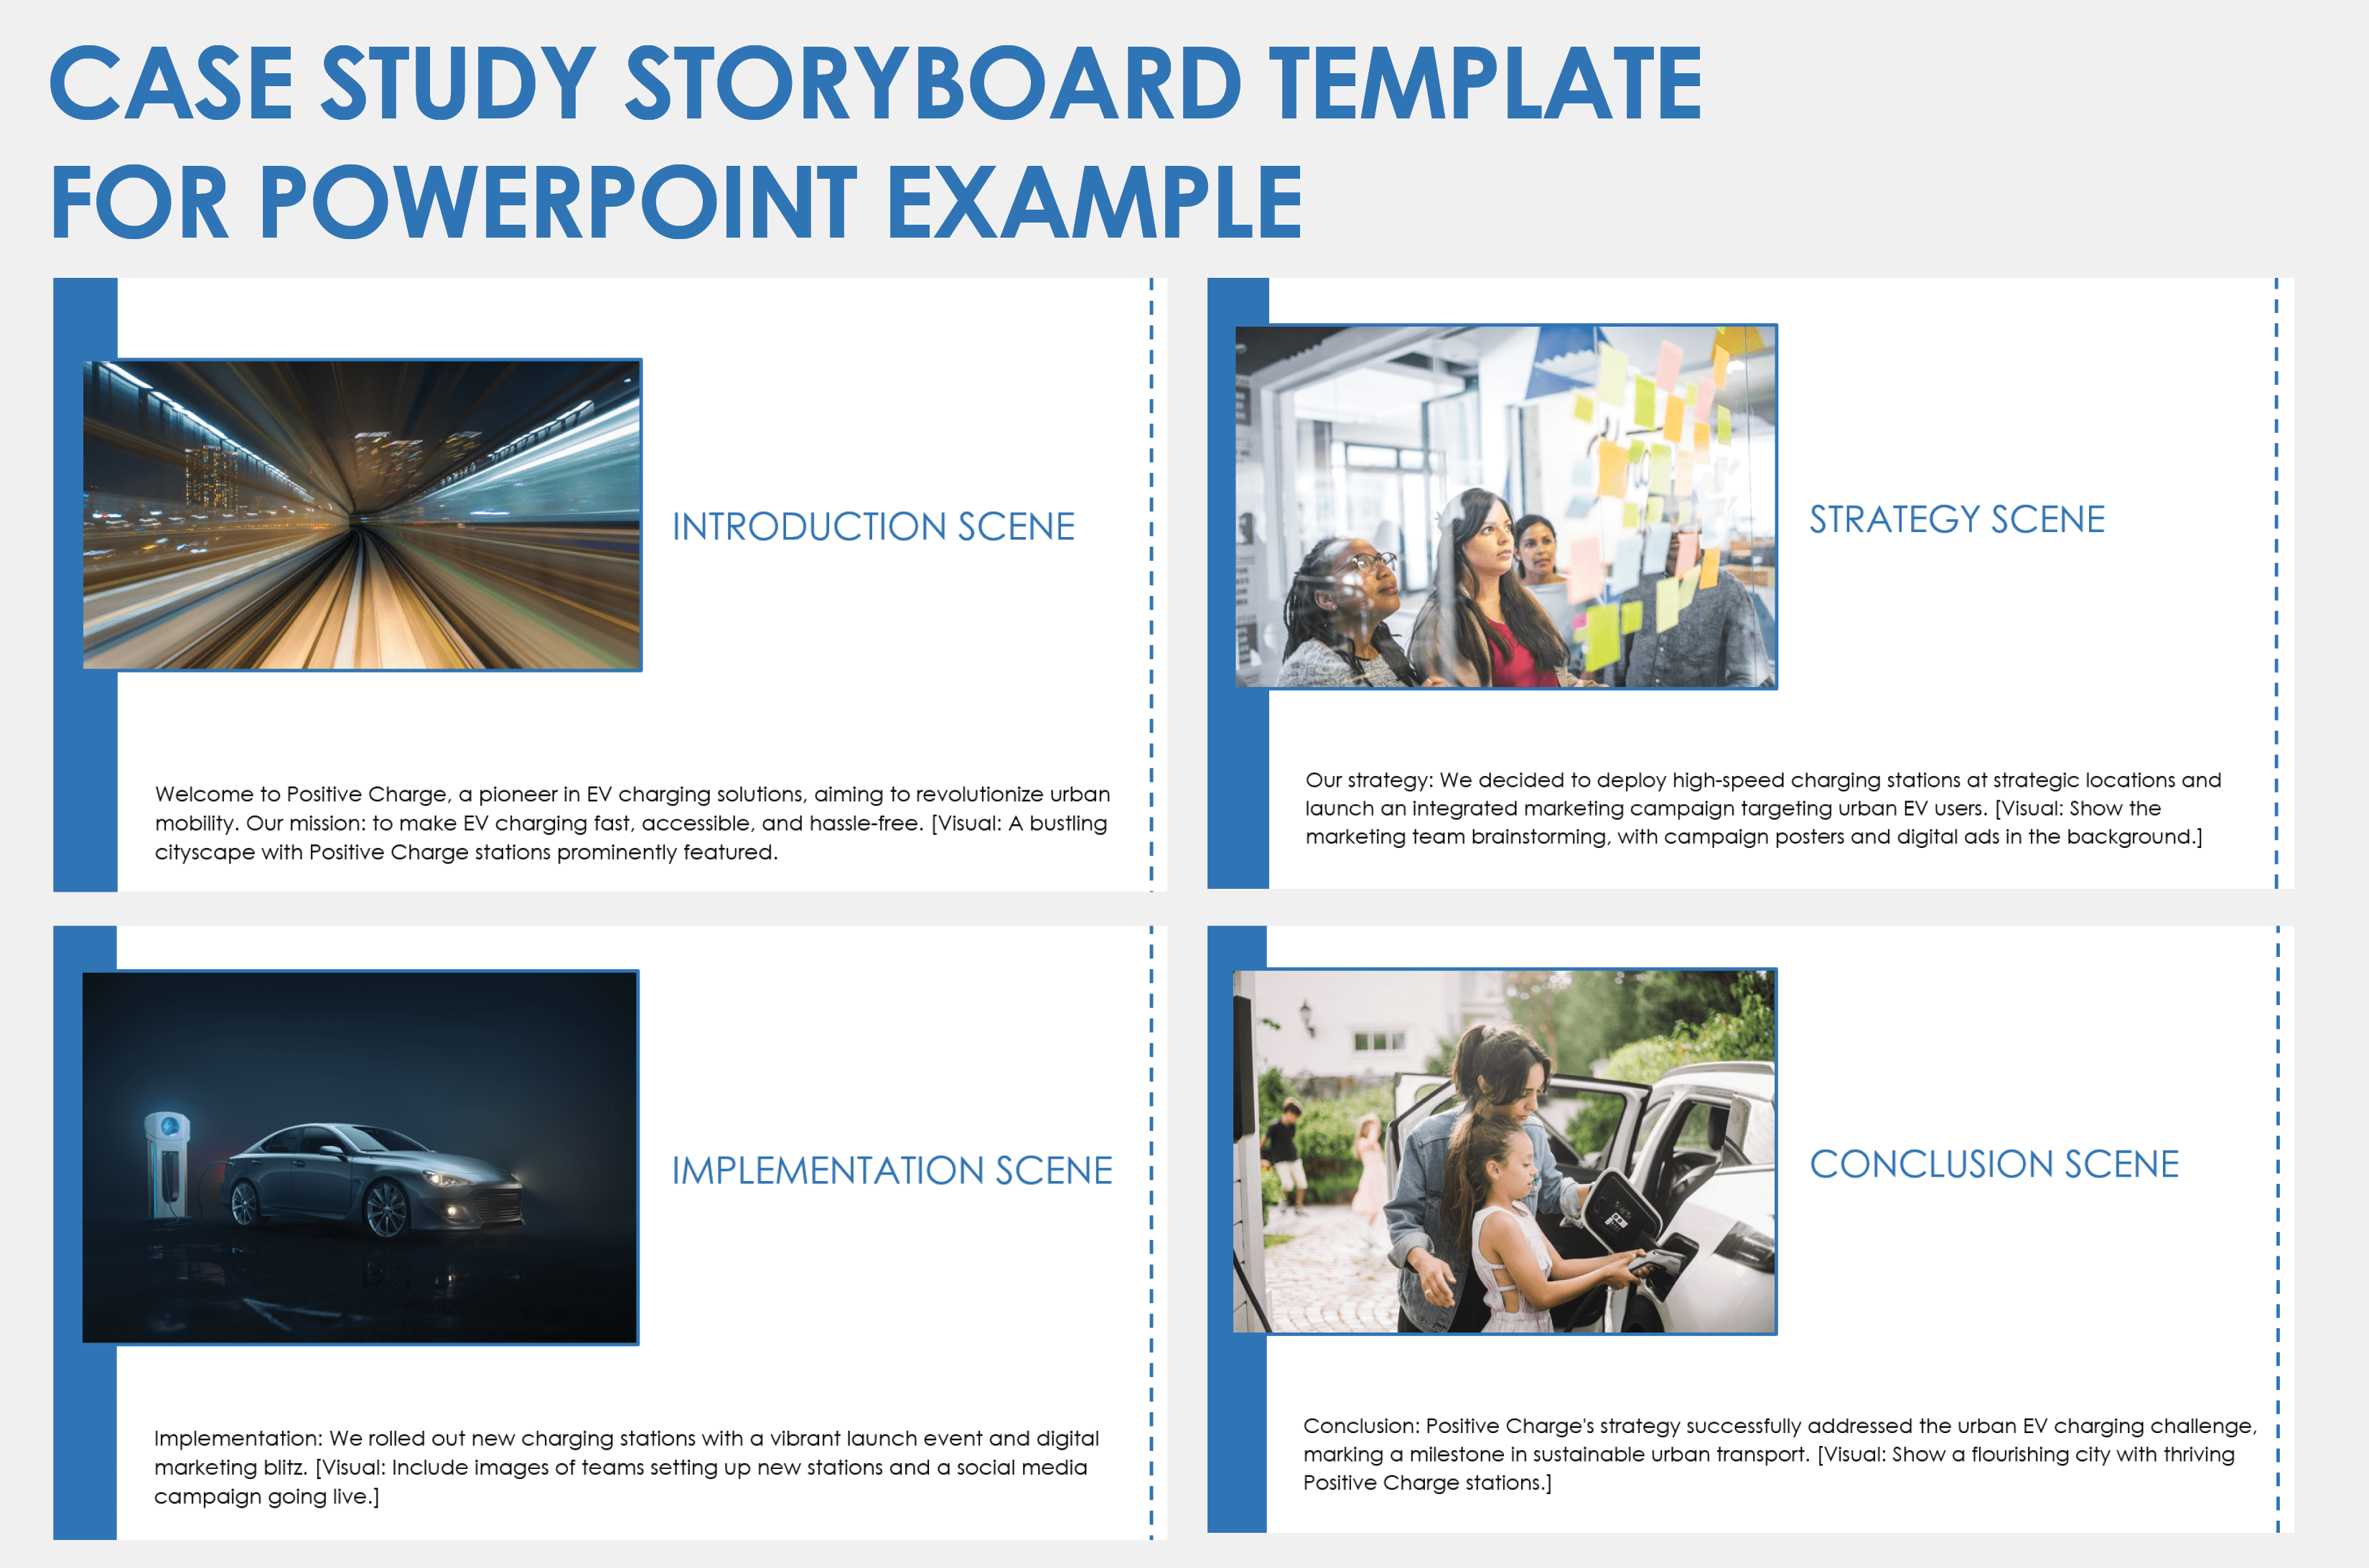 Case Study Storyboard Example Template PowerPoint